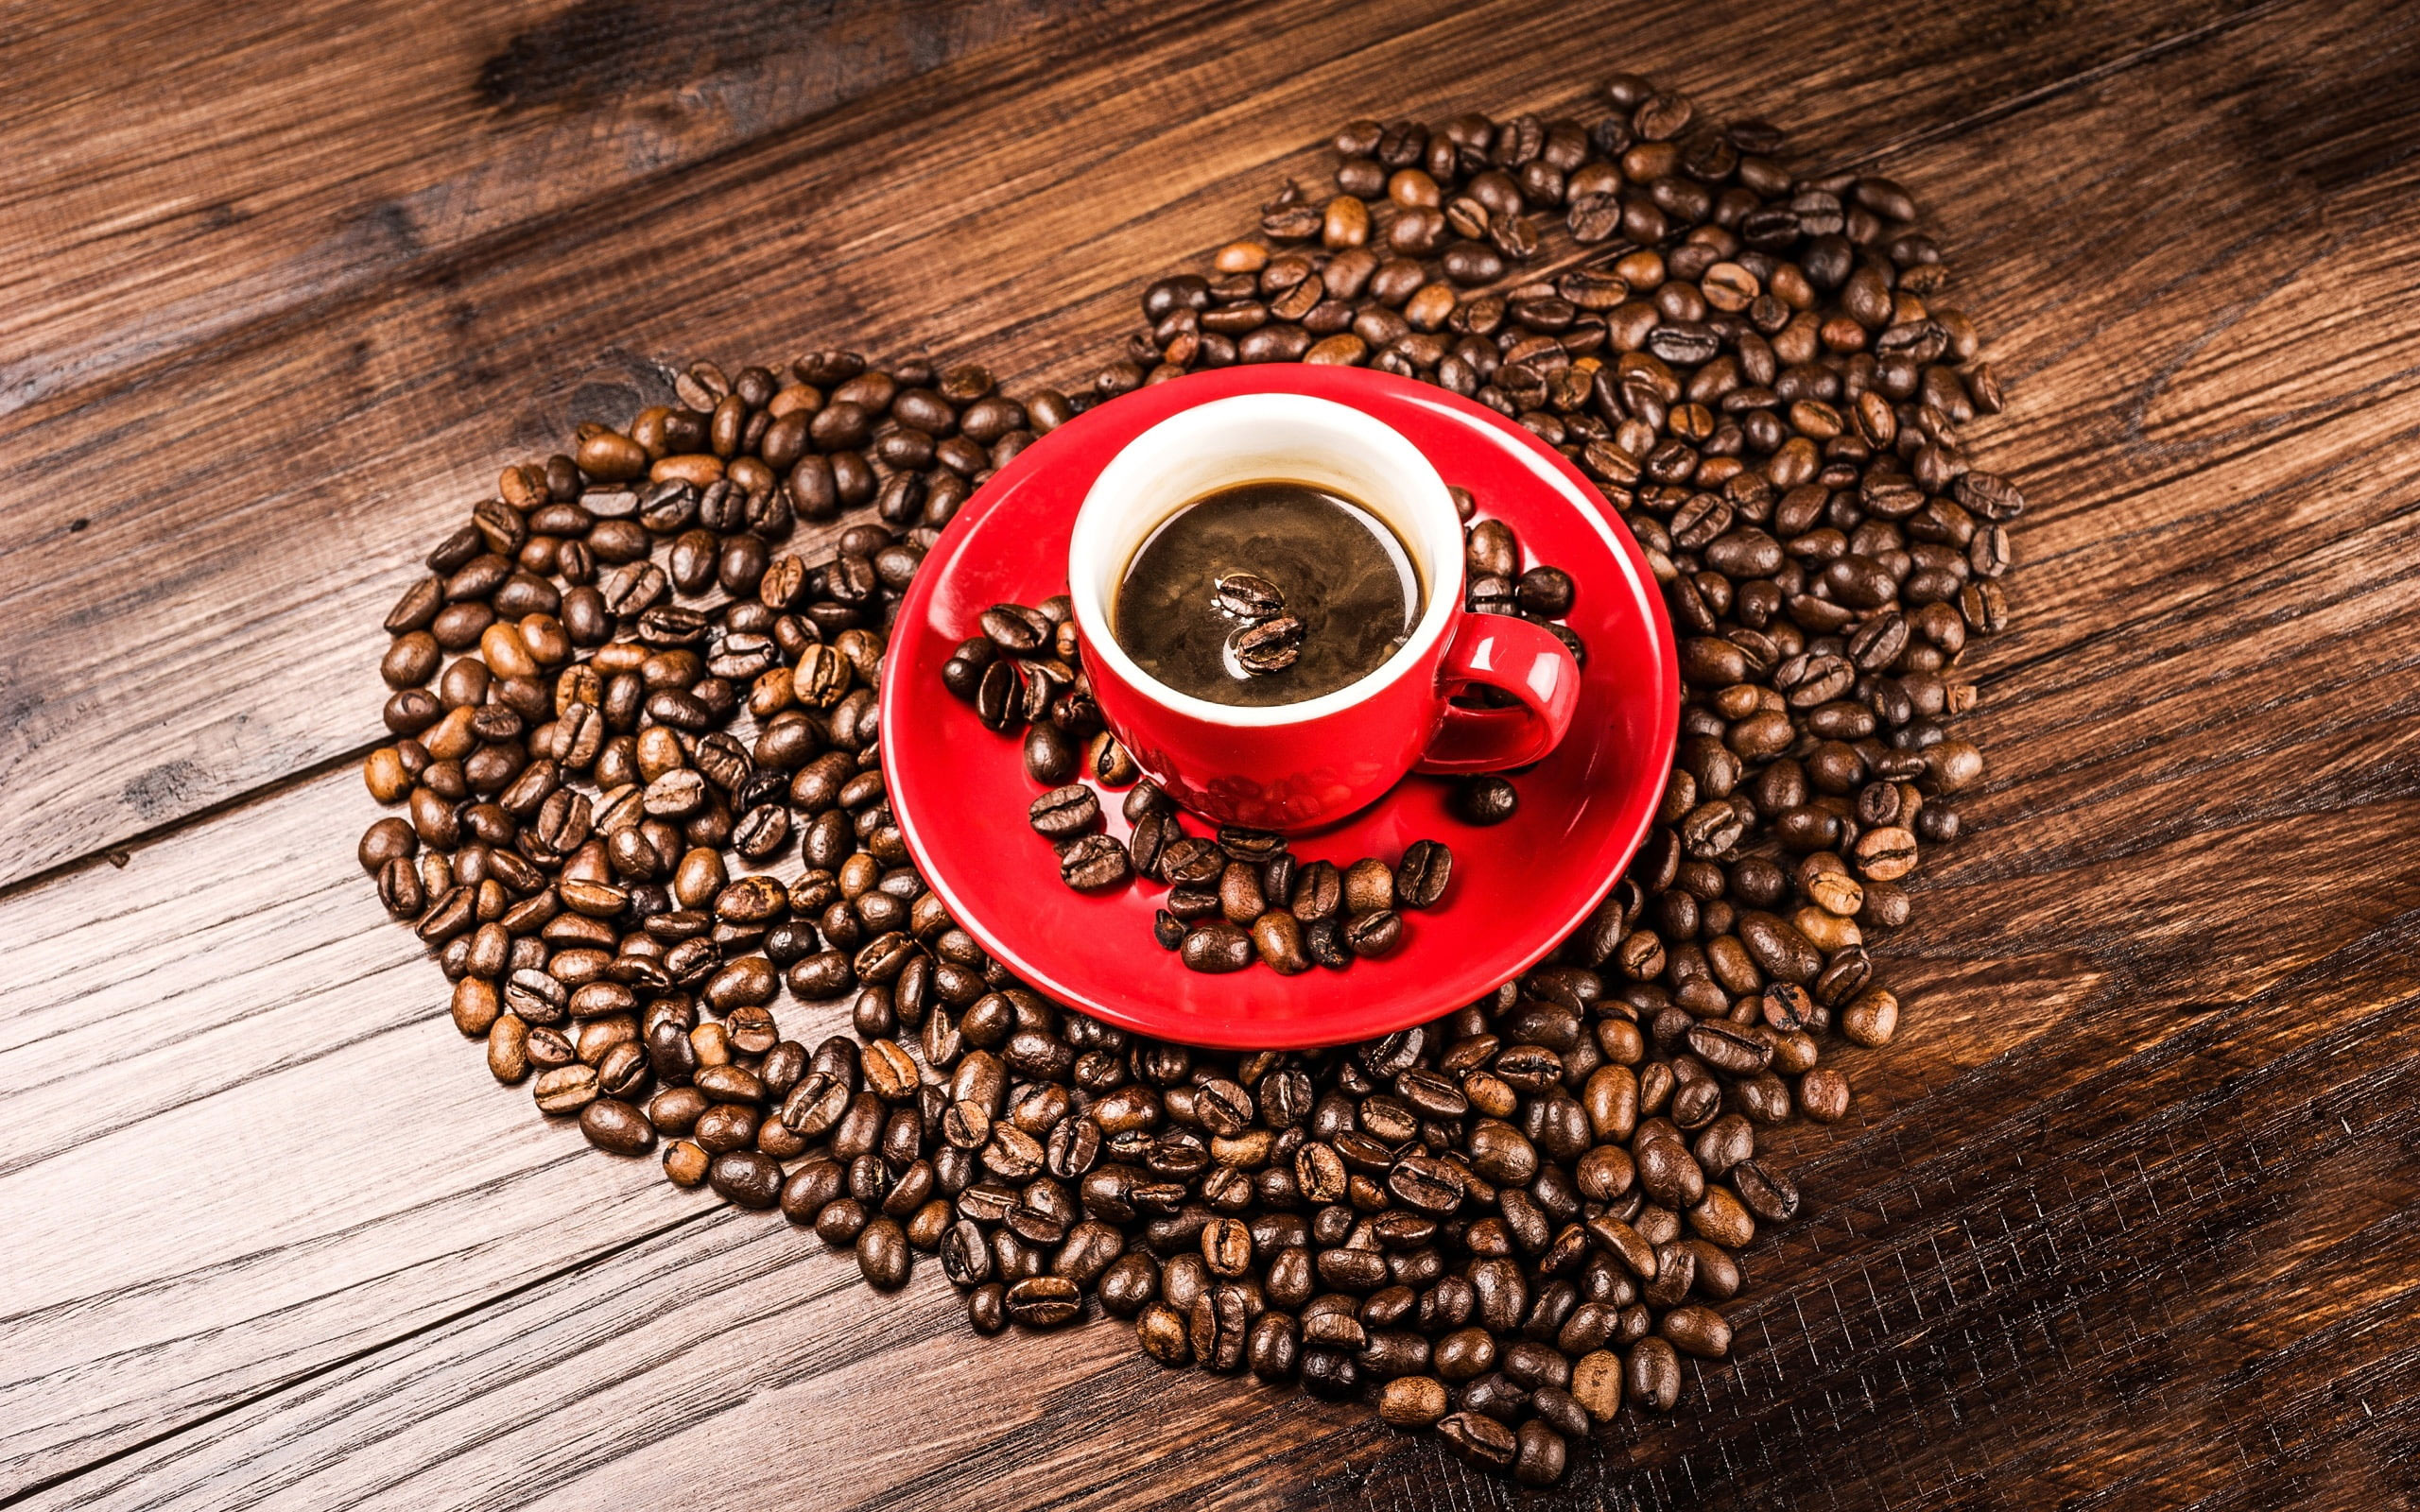 Coffee beans wallpaper, grains, heart shaped, red cup, red ceramic round plate, cup; coffee bean lot